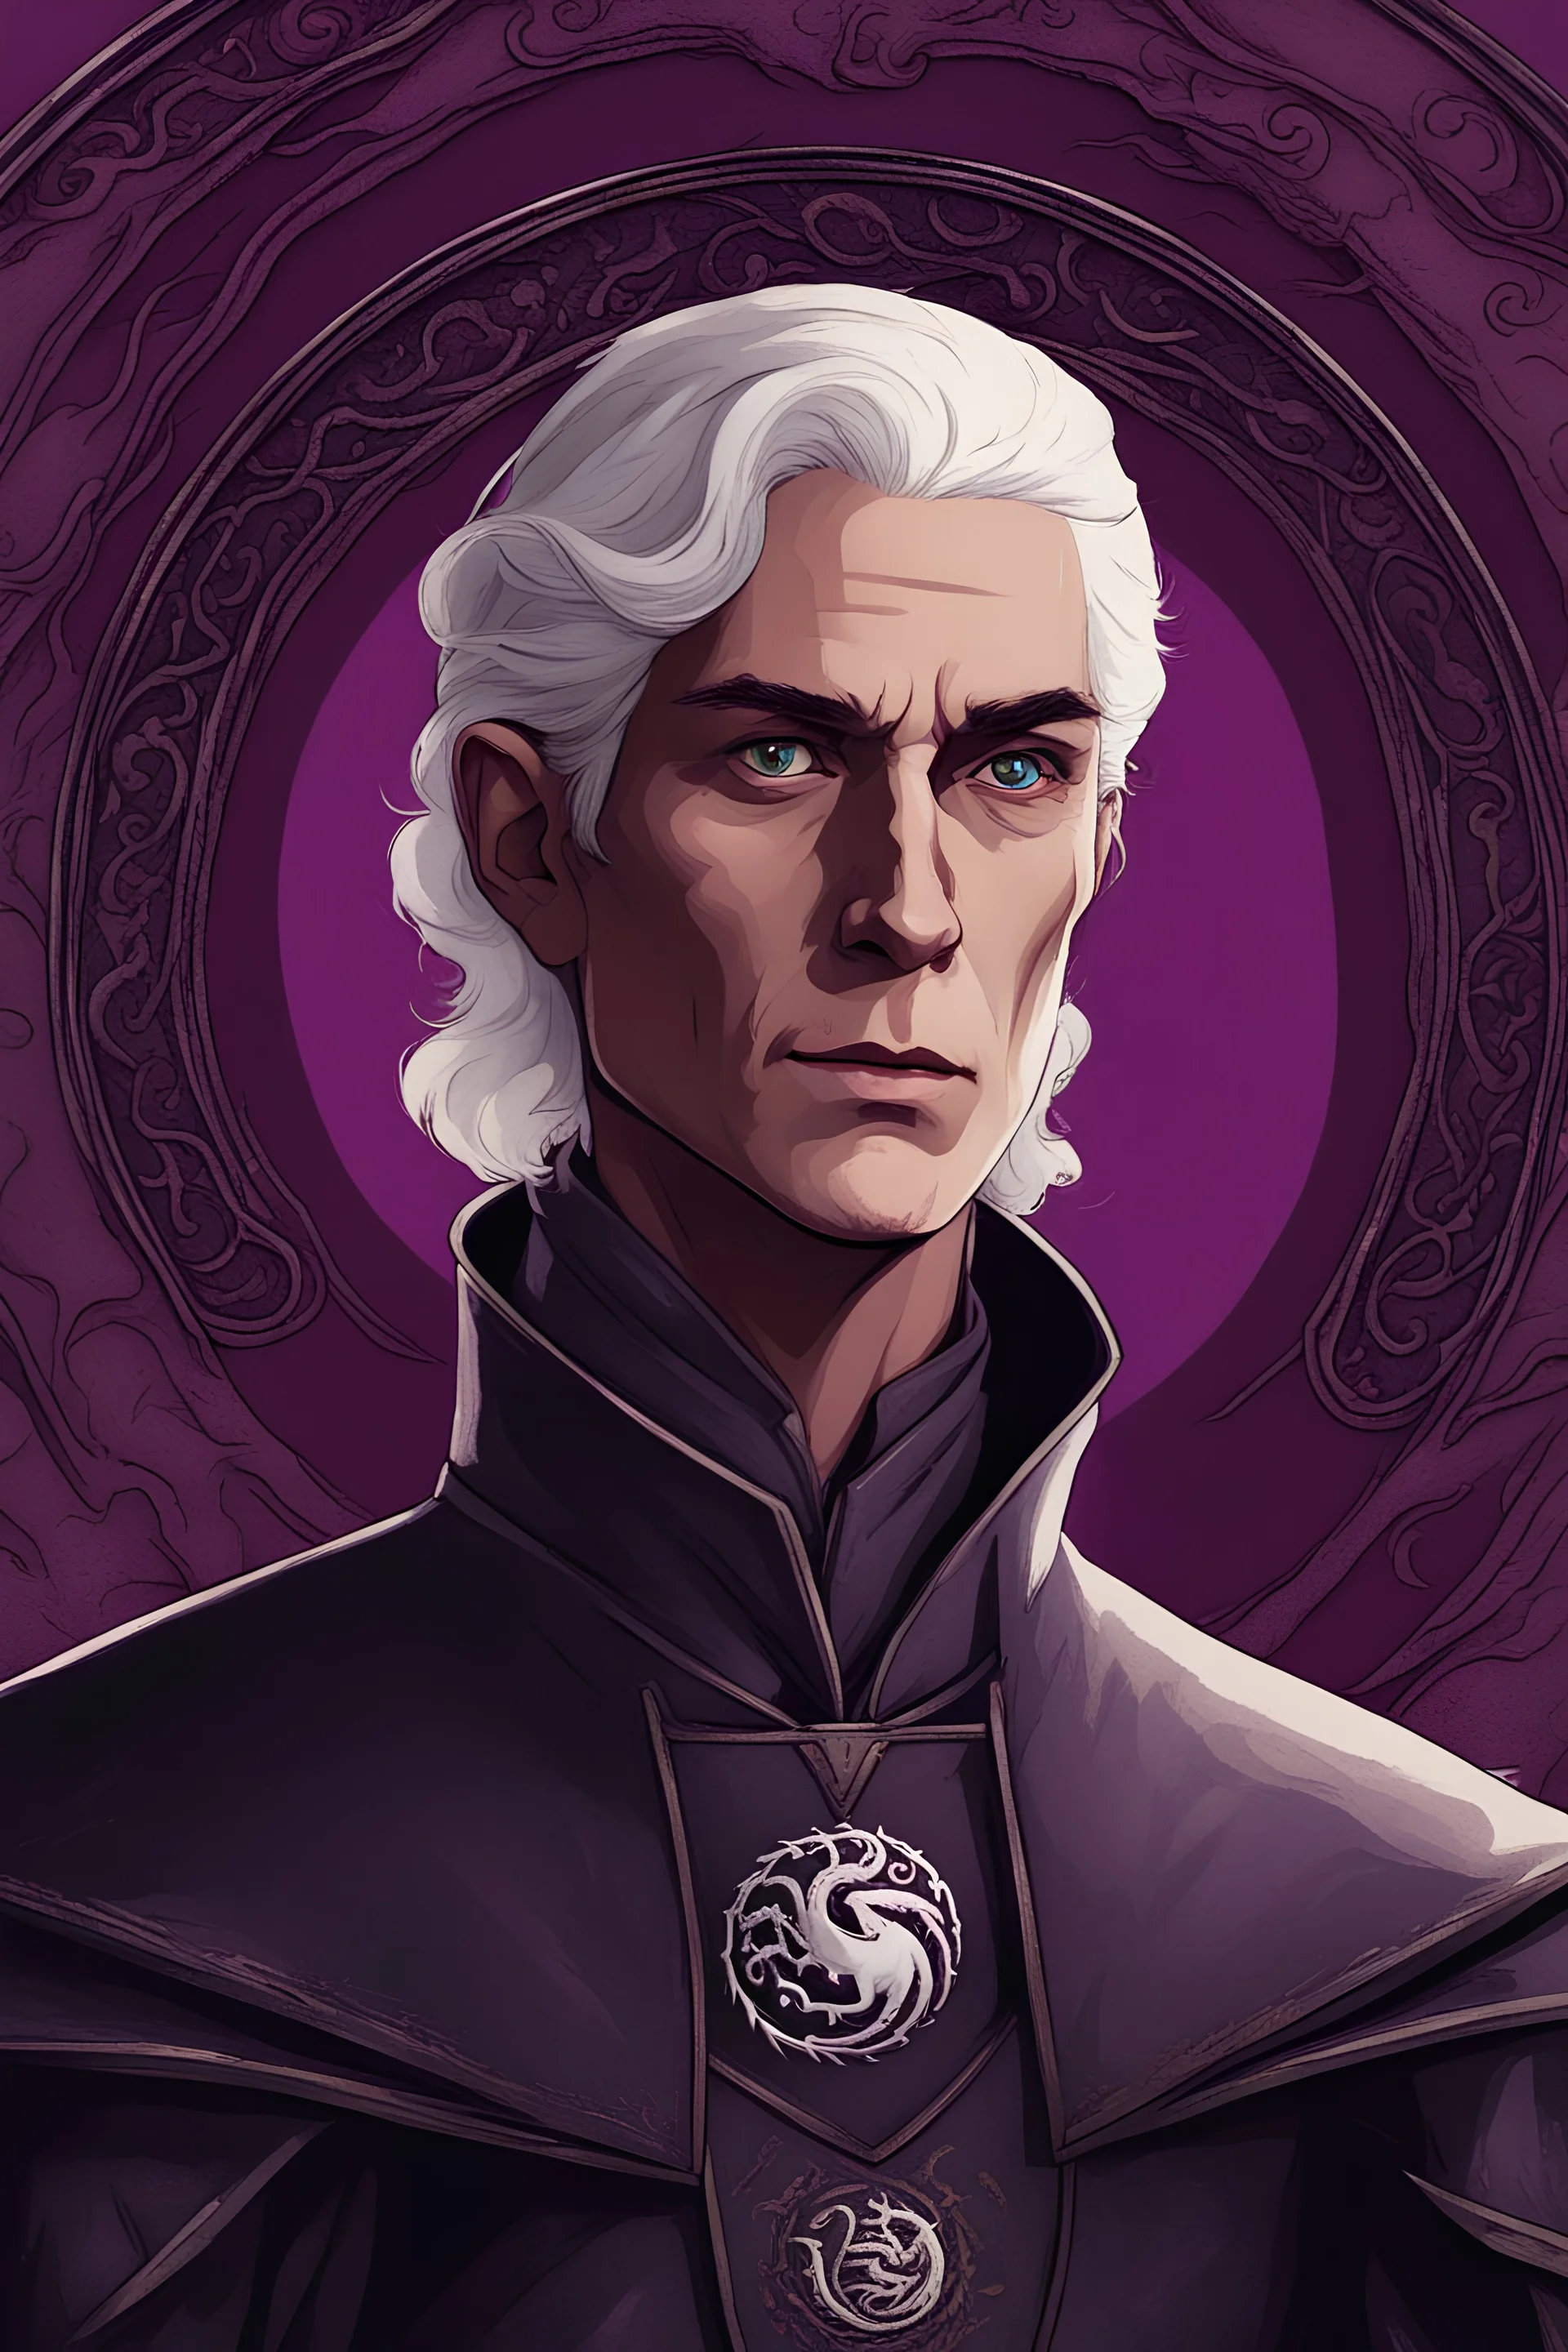 A thin man with silver hair, purple eyes in a medieval costume with the Targaryen Dragon House emblem